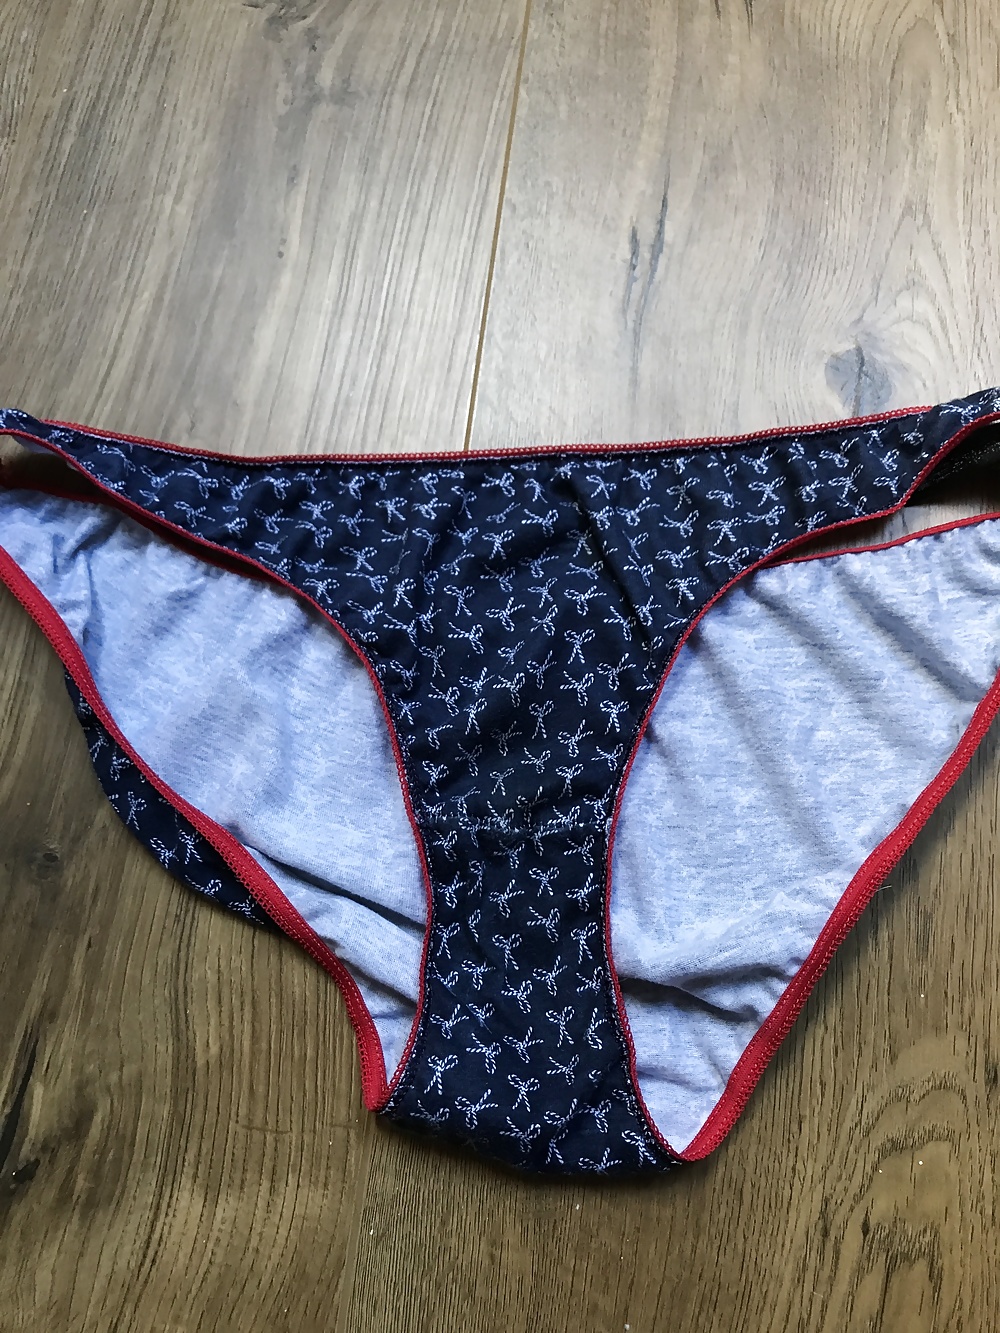 Wife's dirty knickers (1/2)